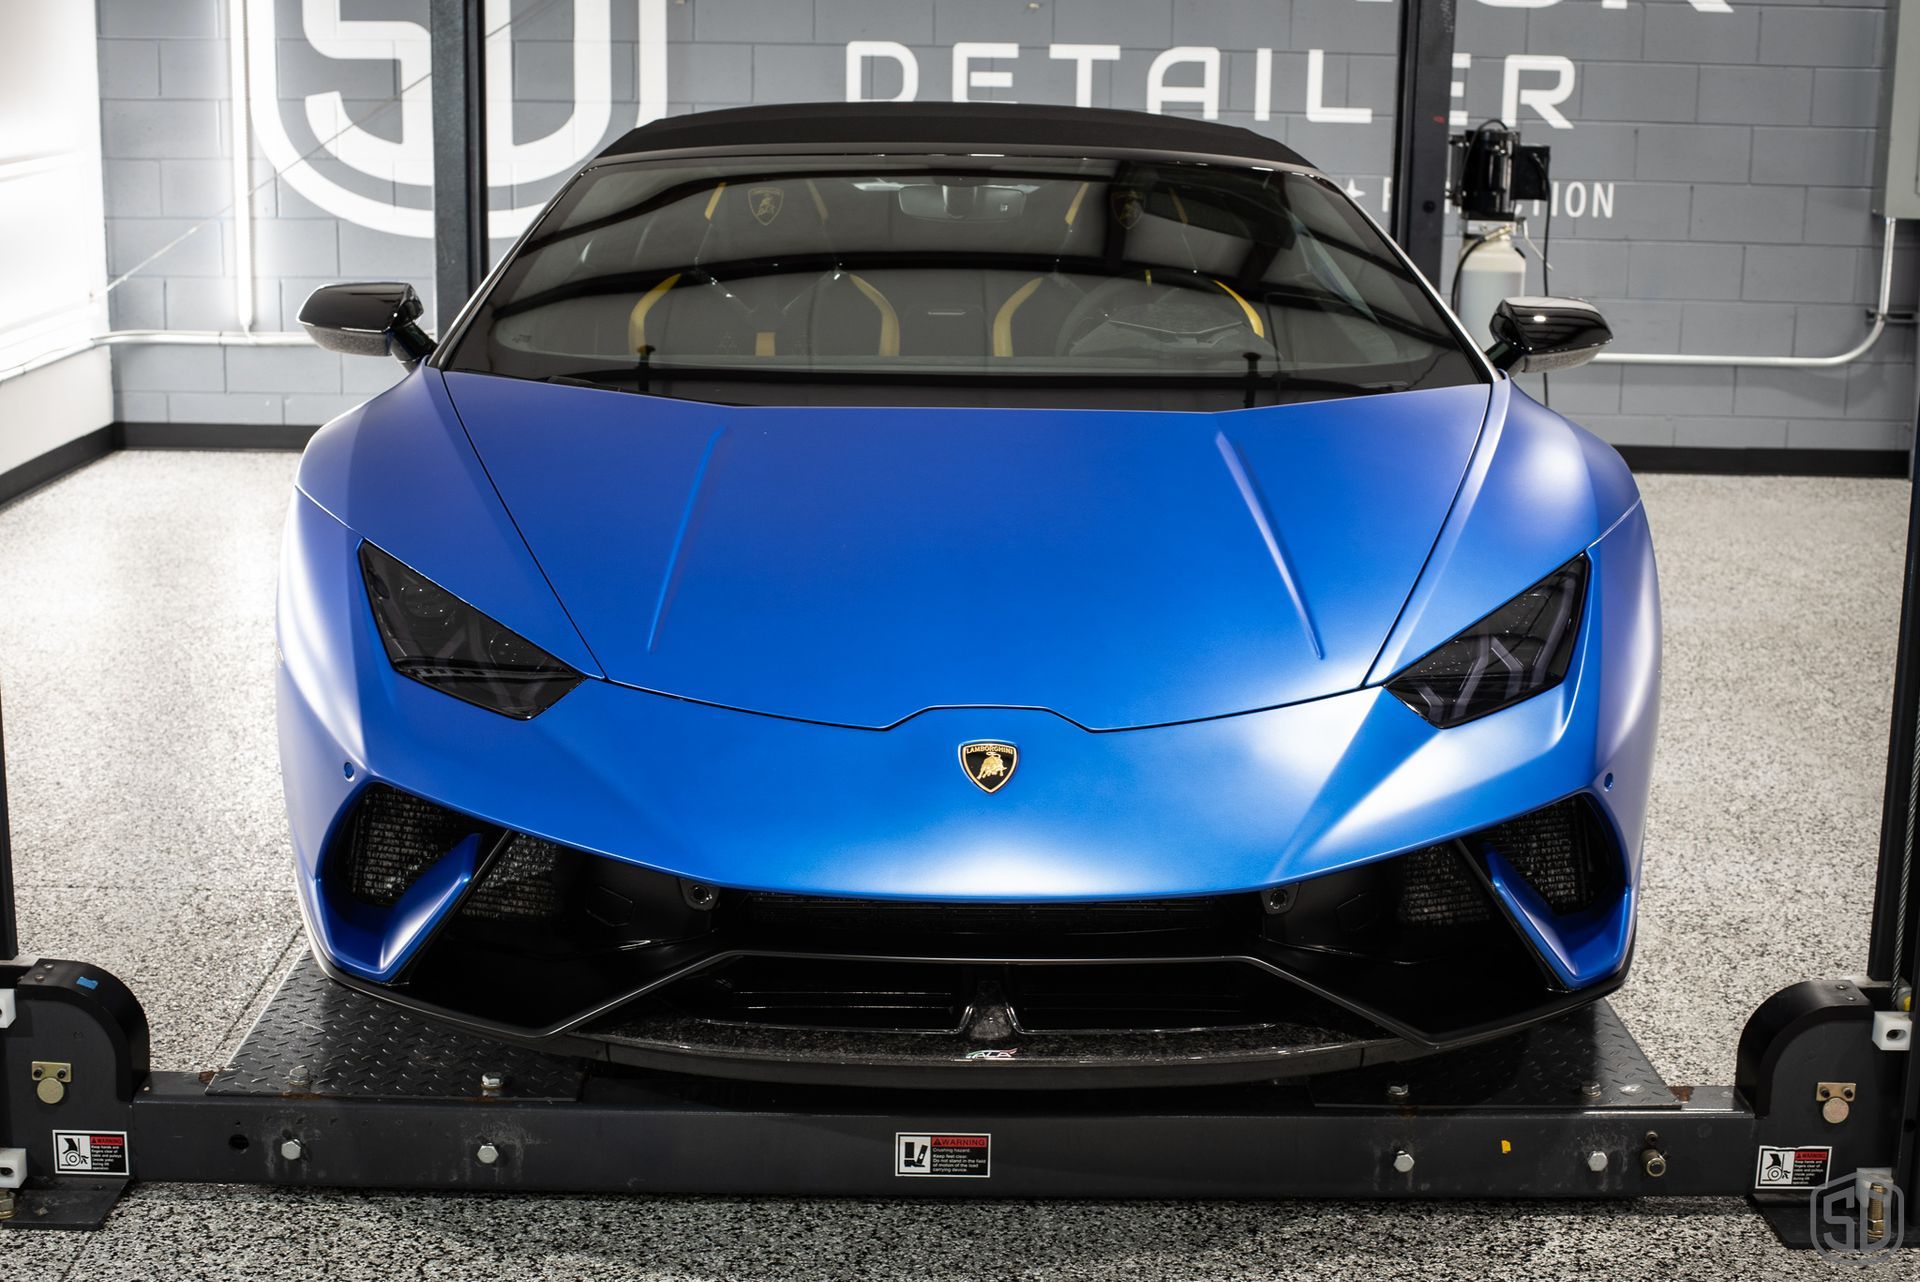 2019 Lamborghini Huracan Spider Paint and Windsheld Protection Film, and Modesta Coatings front end view Orlando